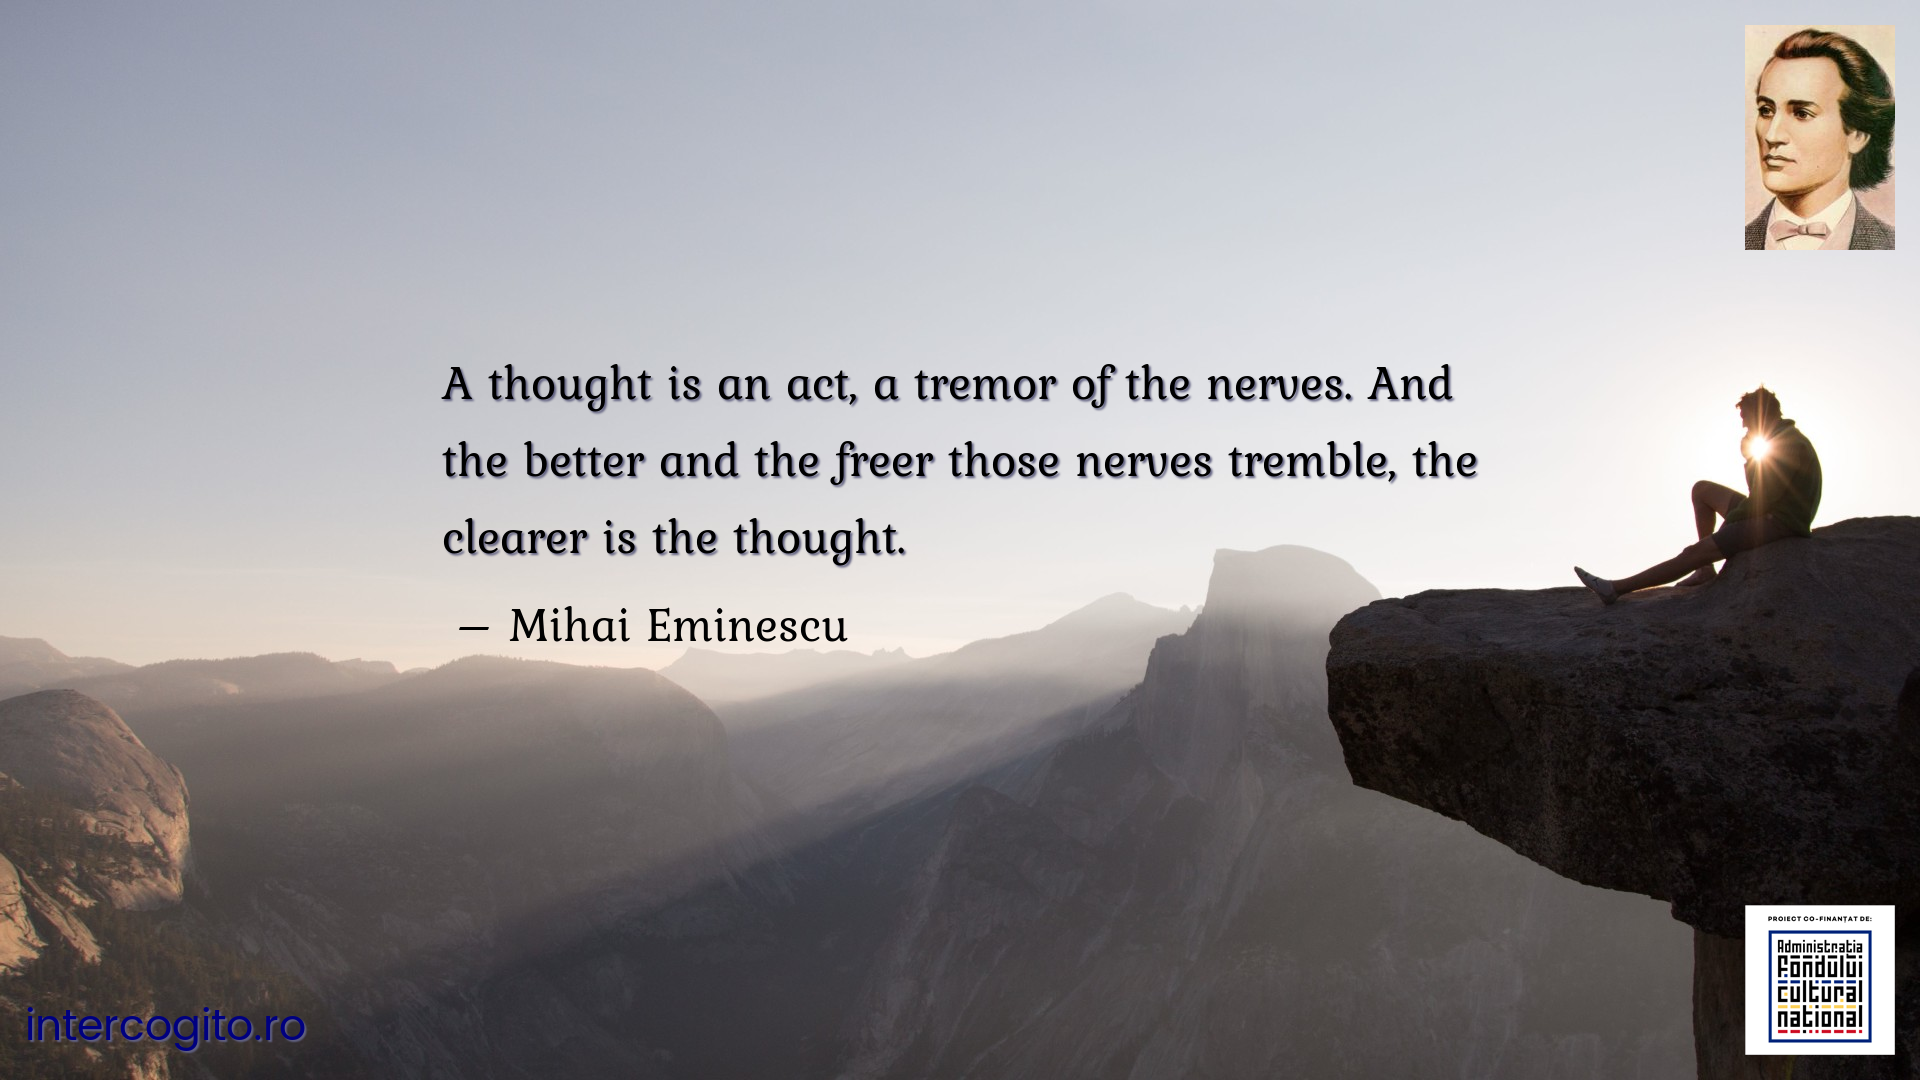 A thought is an act, a tremor of the nerves. And the better and the freer those nerves tremble, the clearer is the thought.